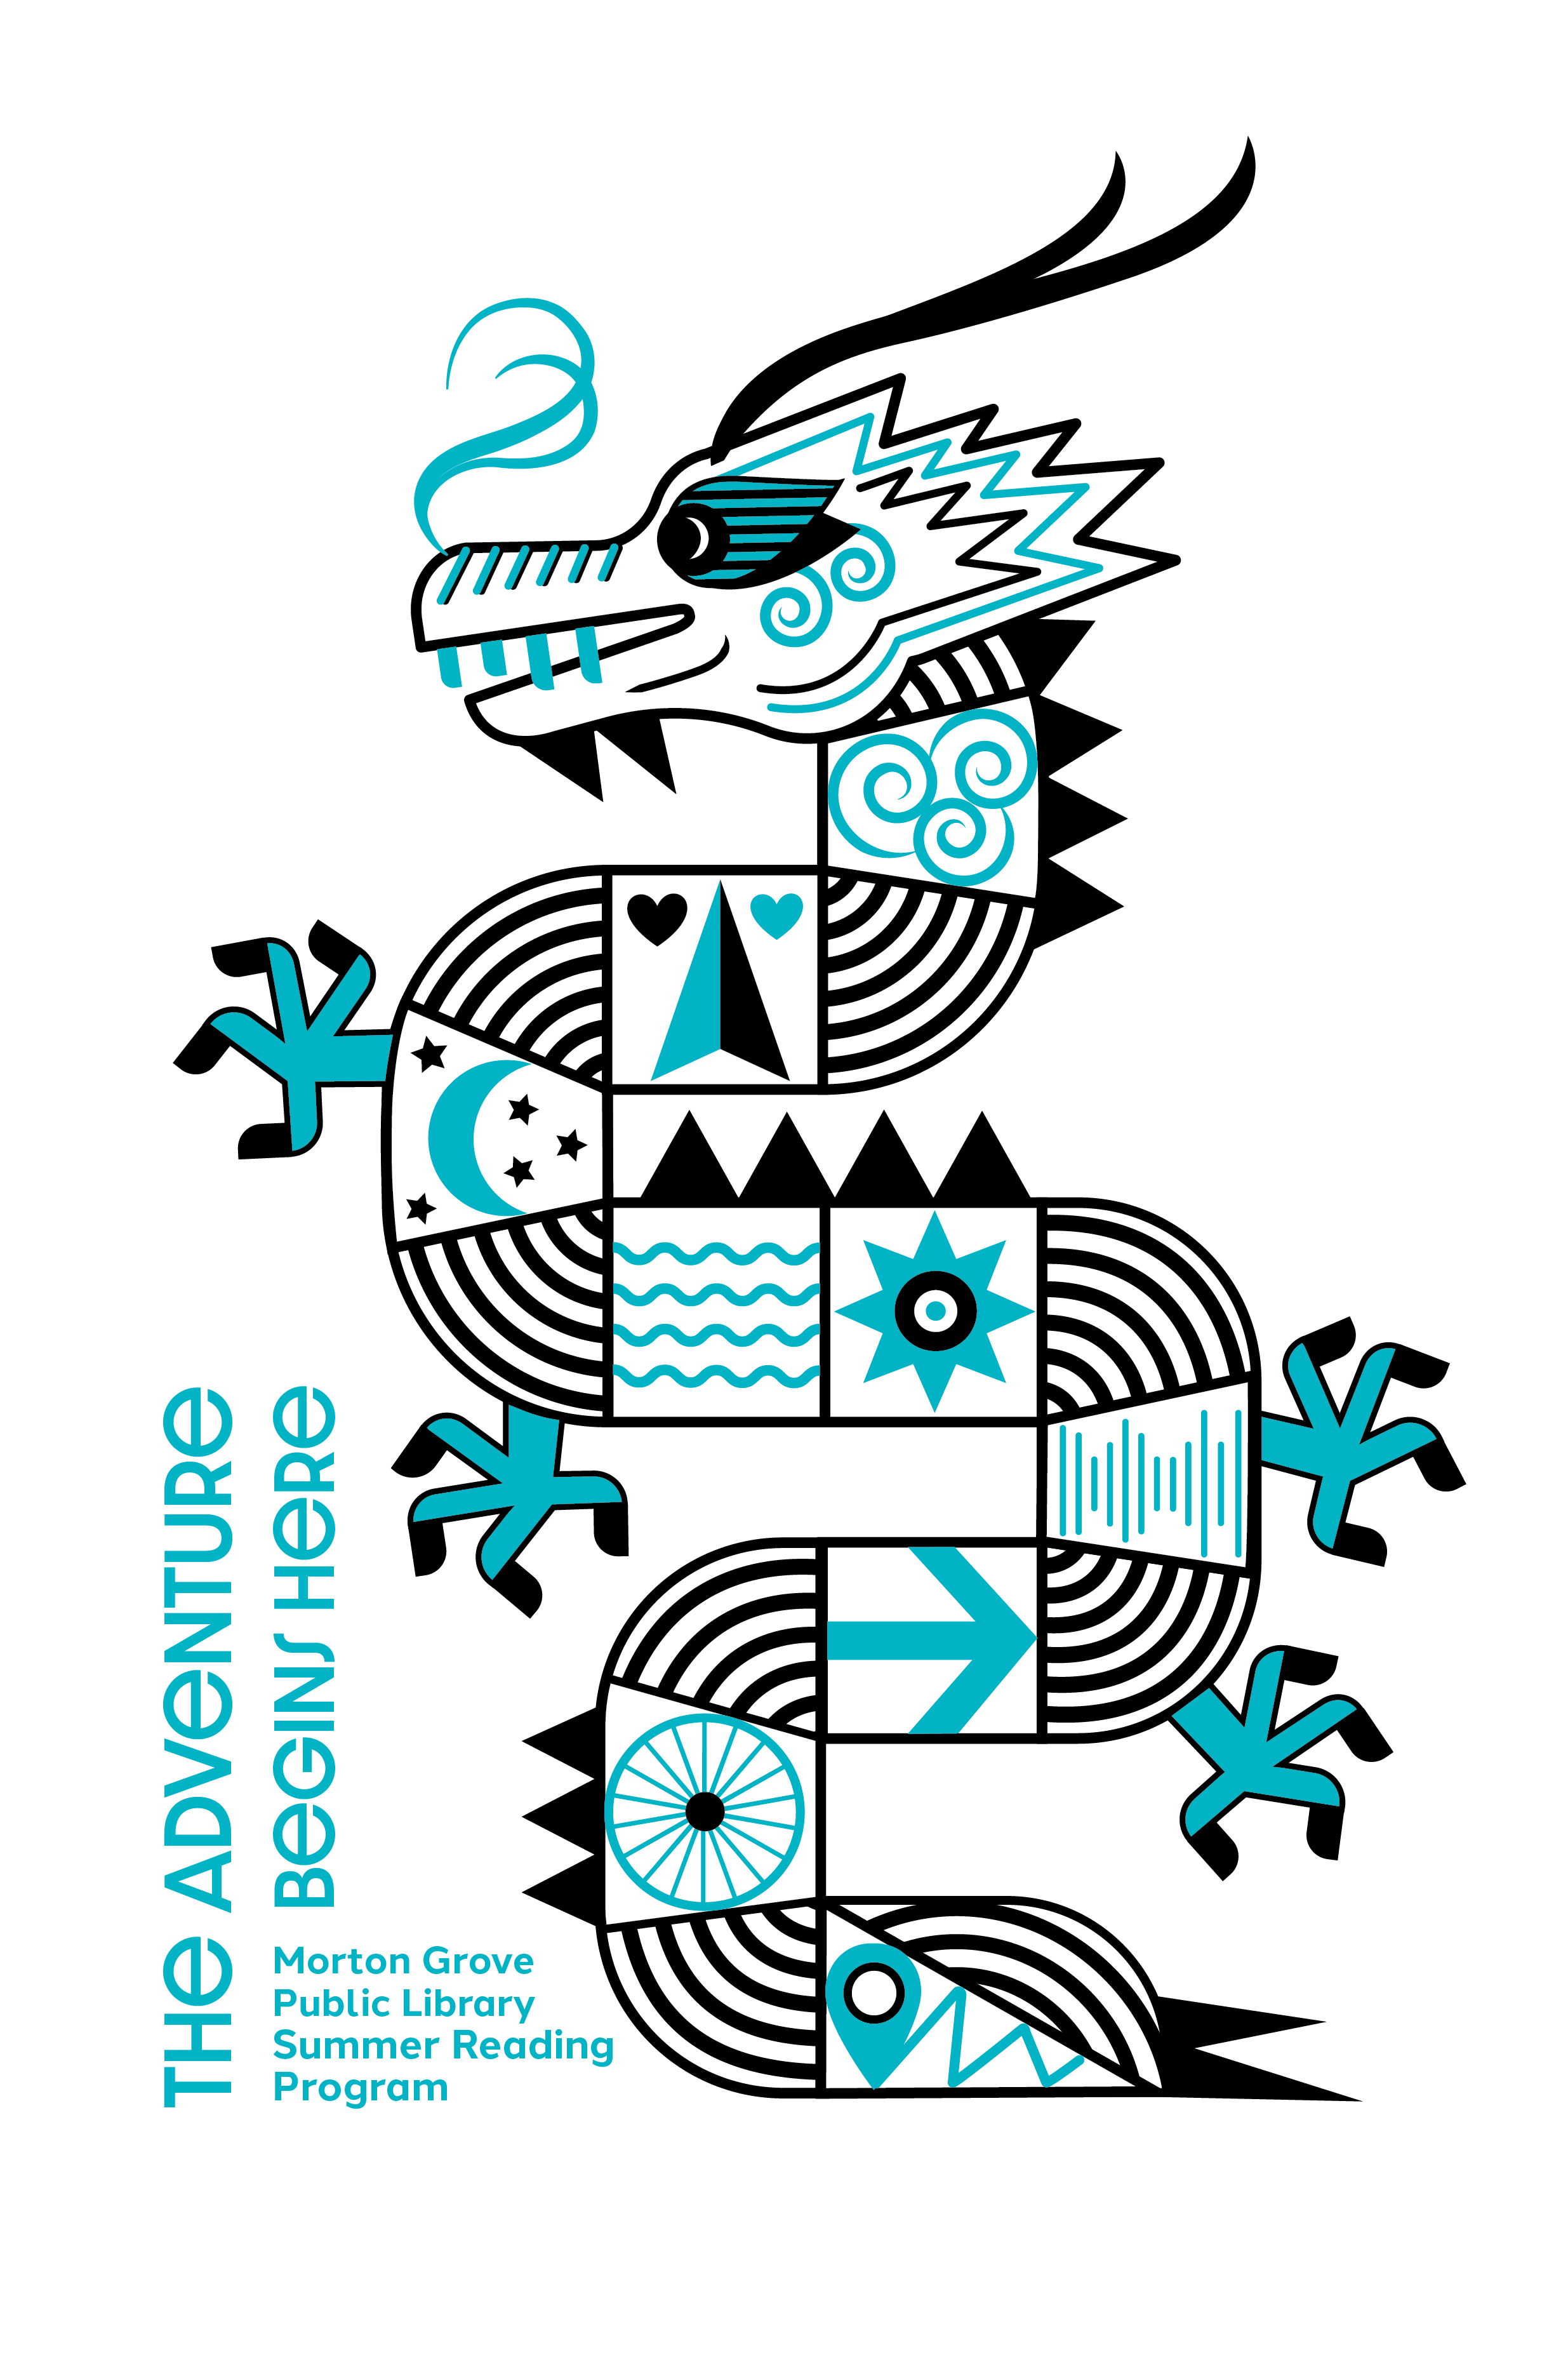 Summer Reading Program logo of a dragon with symbols down its body